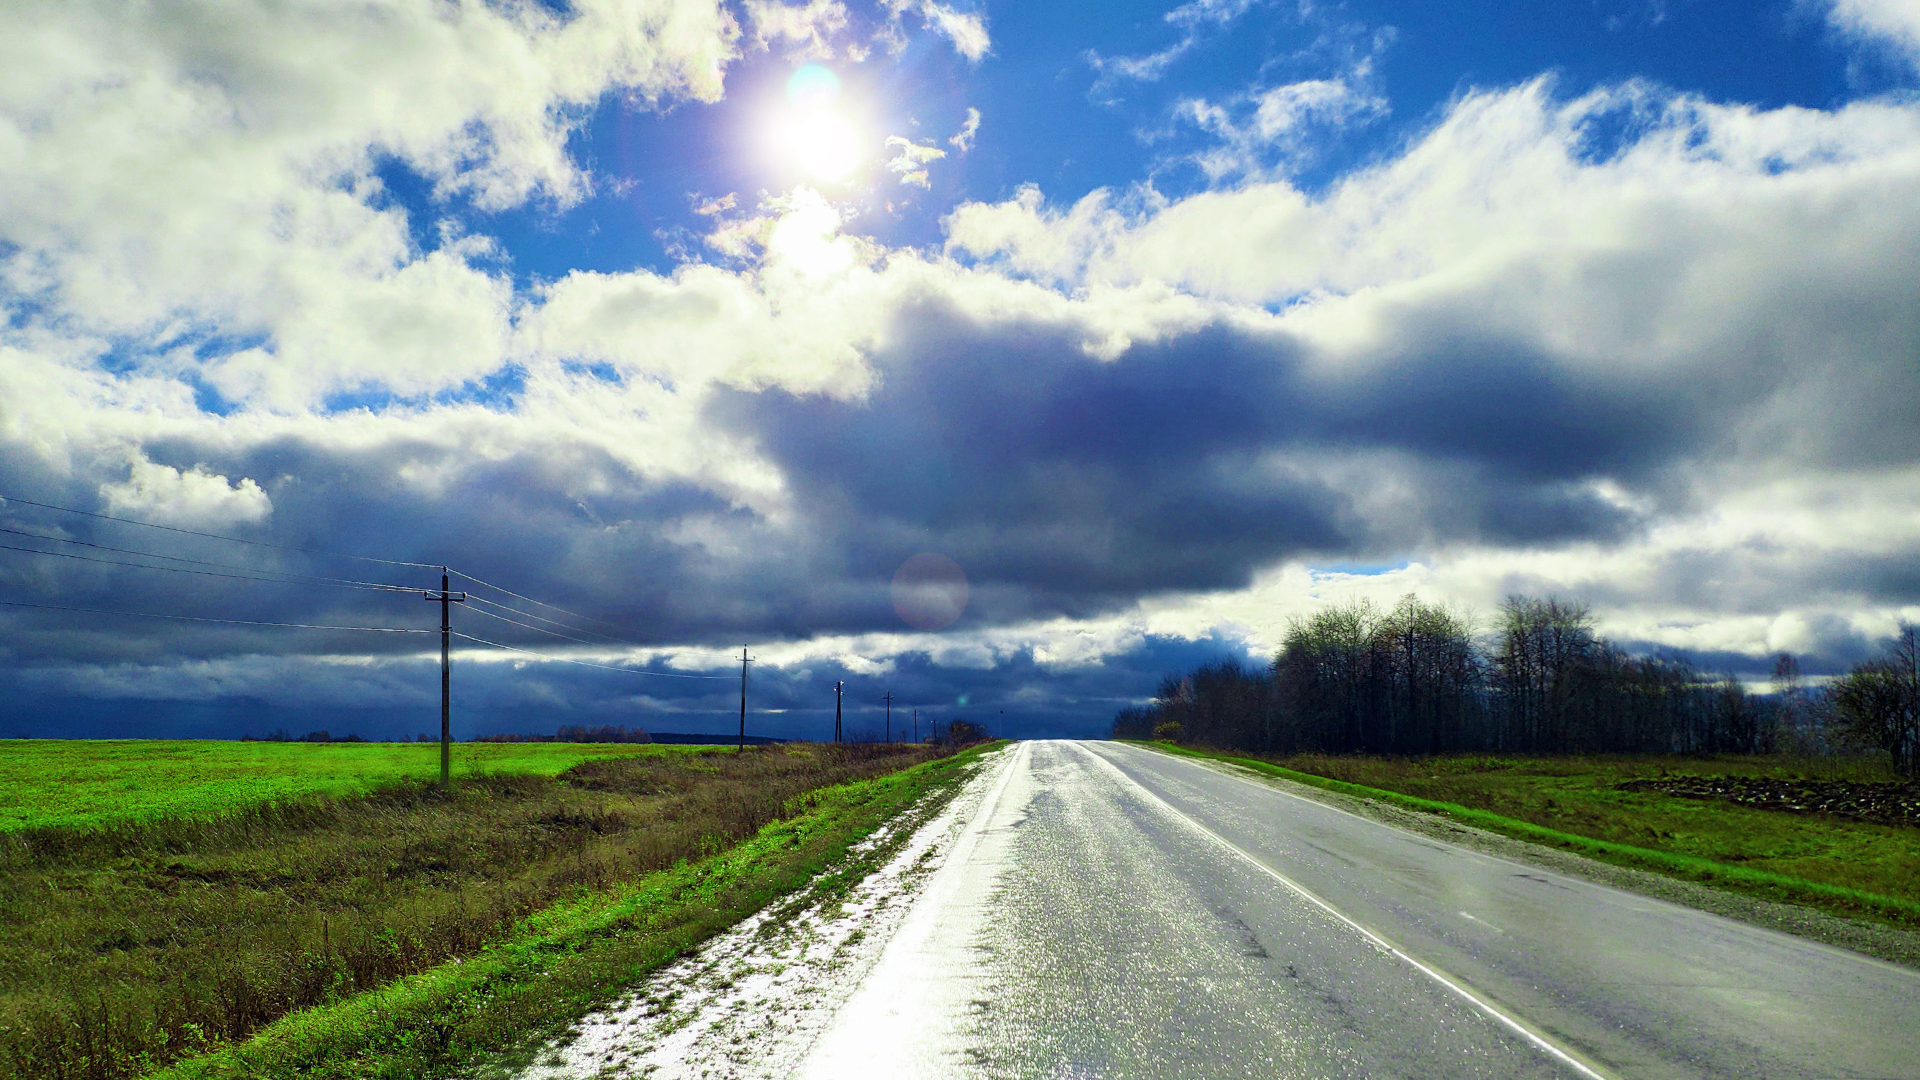 General 1920x1080 sky road clouds nature landscape field colorful HDR Sun